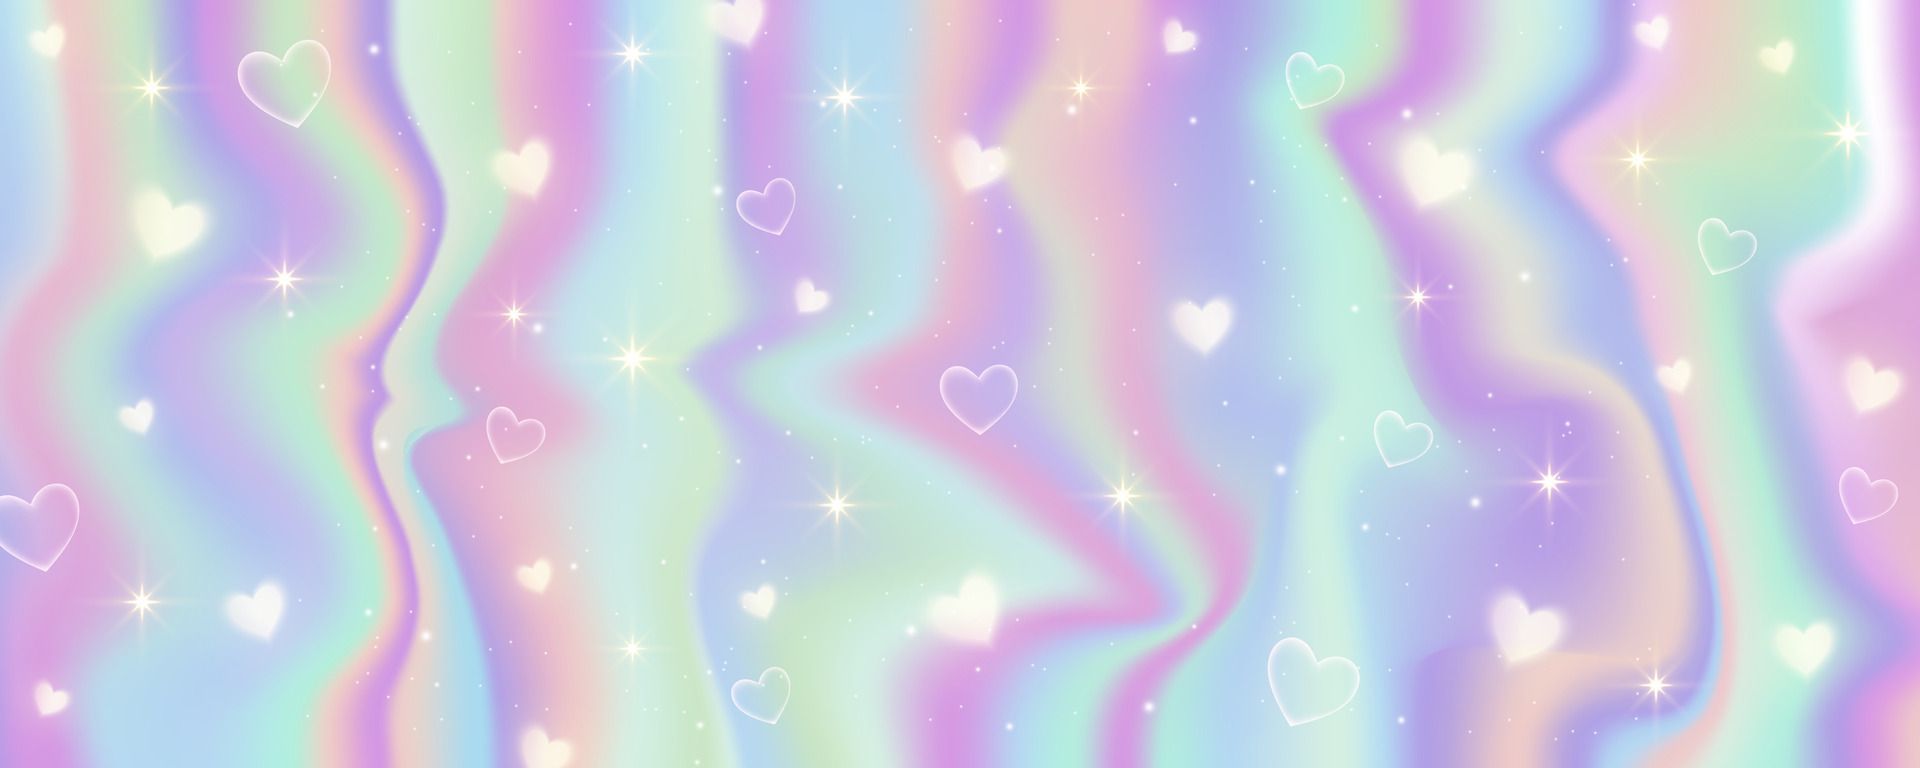 A colorful rainbow background with white hearts and stars - Iridescent